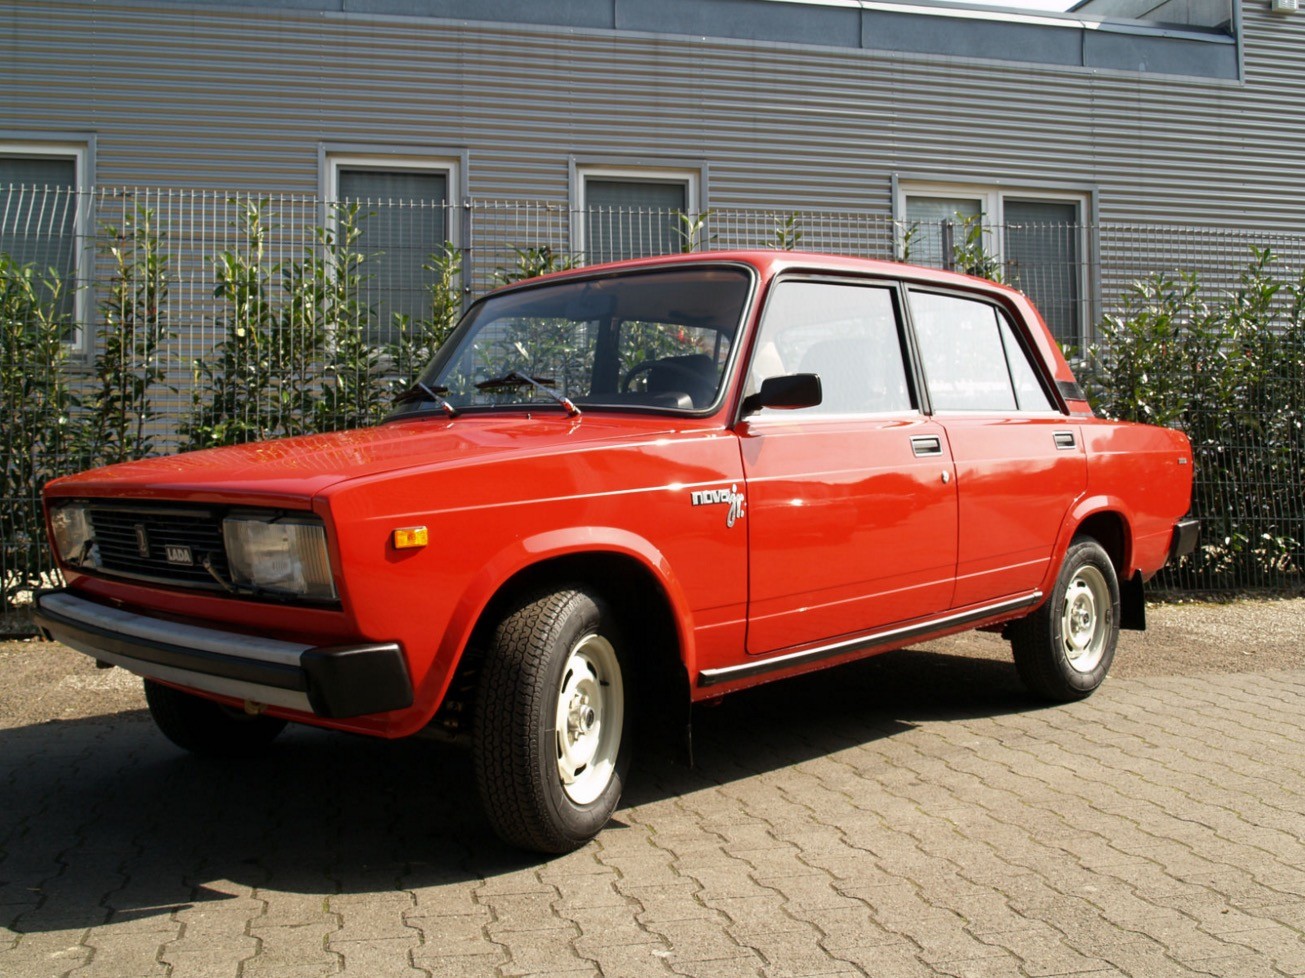 lada-riva-with-20-miles-on-the-odometer-listed-for-7300_4.jpg